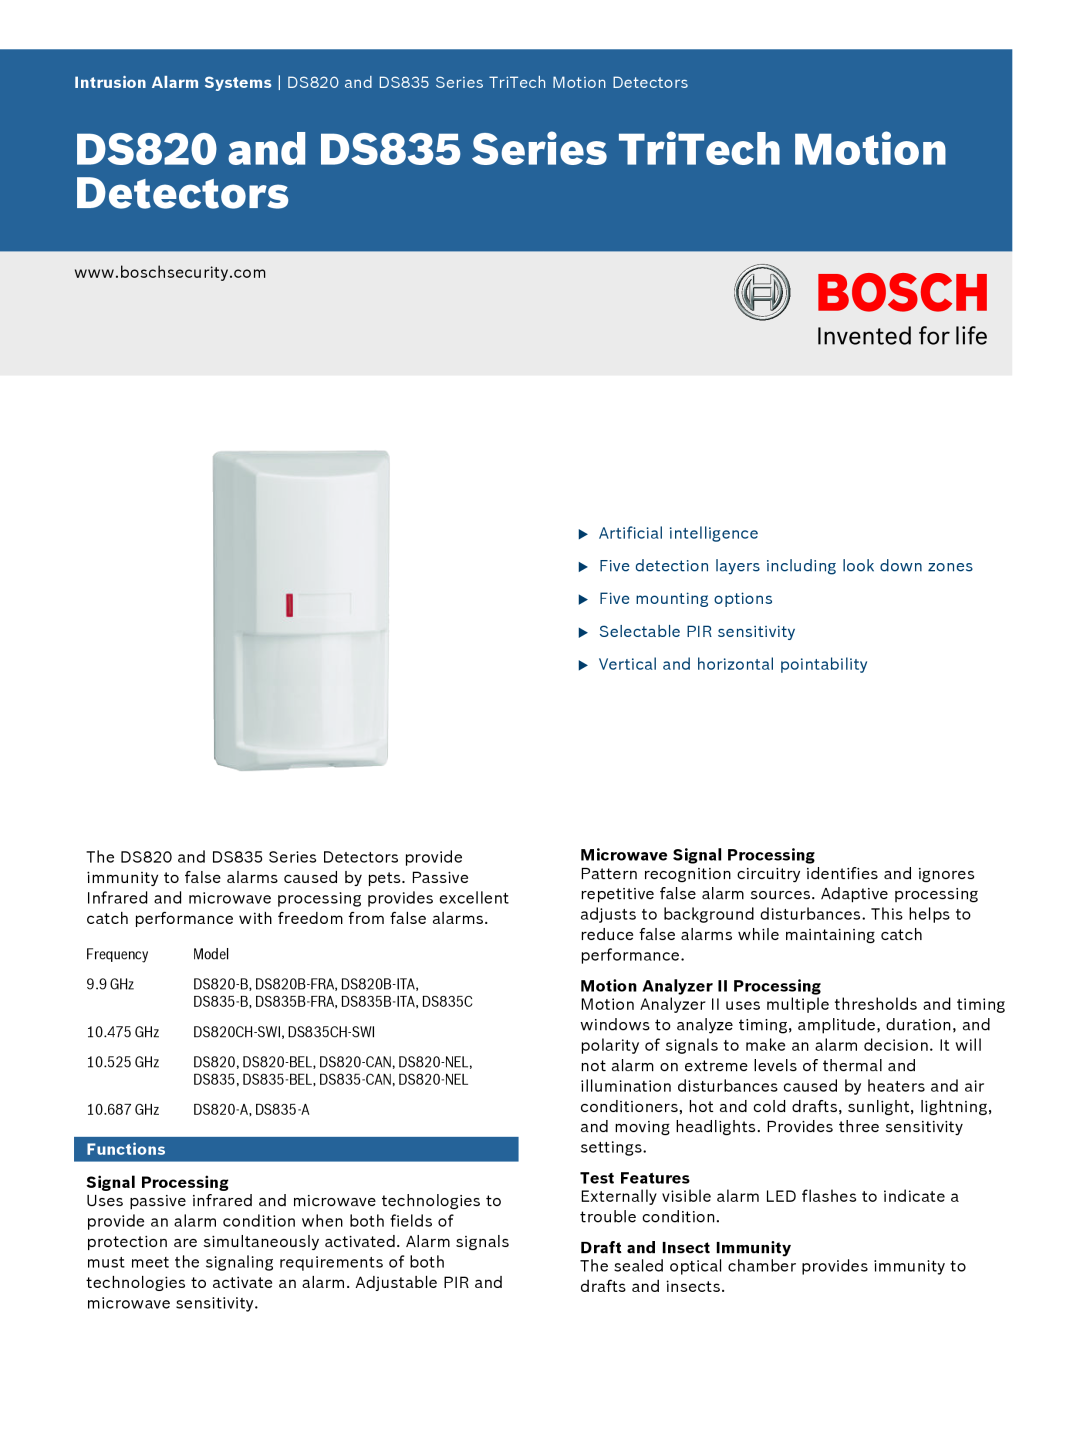 Bosch Appliances DS820 manual Functions, Microwave Signal Processing, Motion Analyzer II Processing, Test Features 